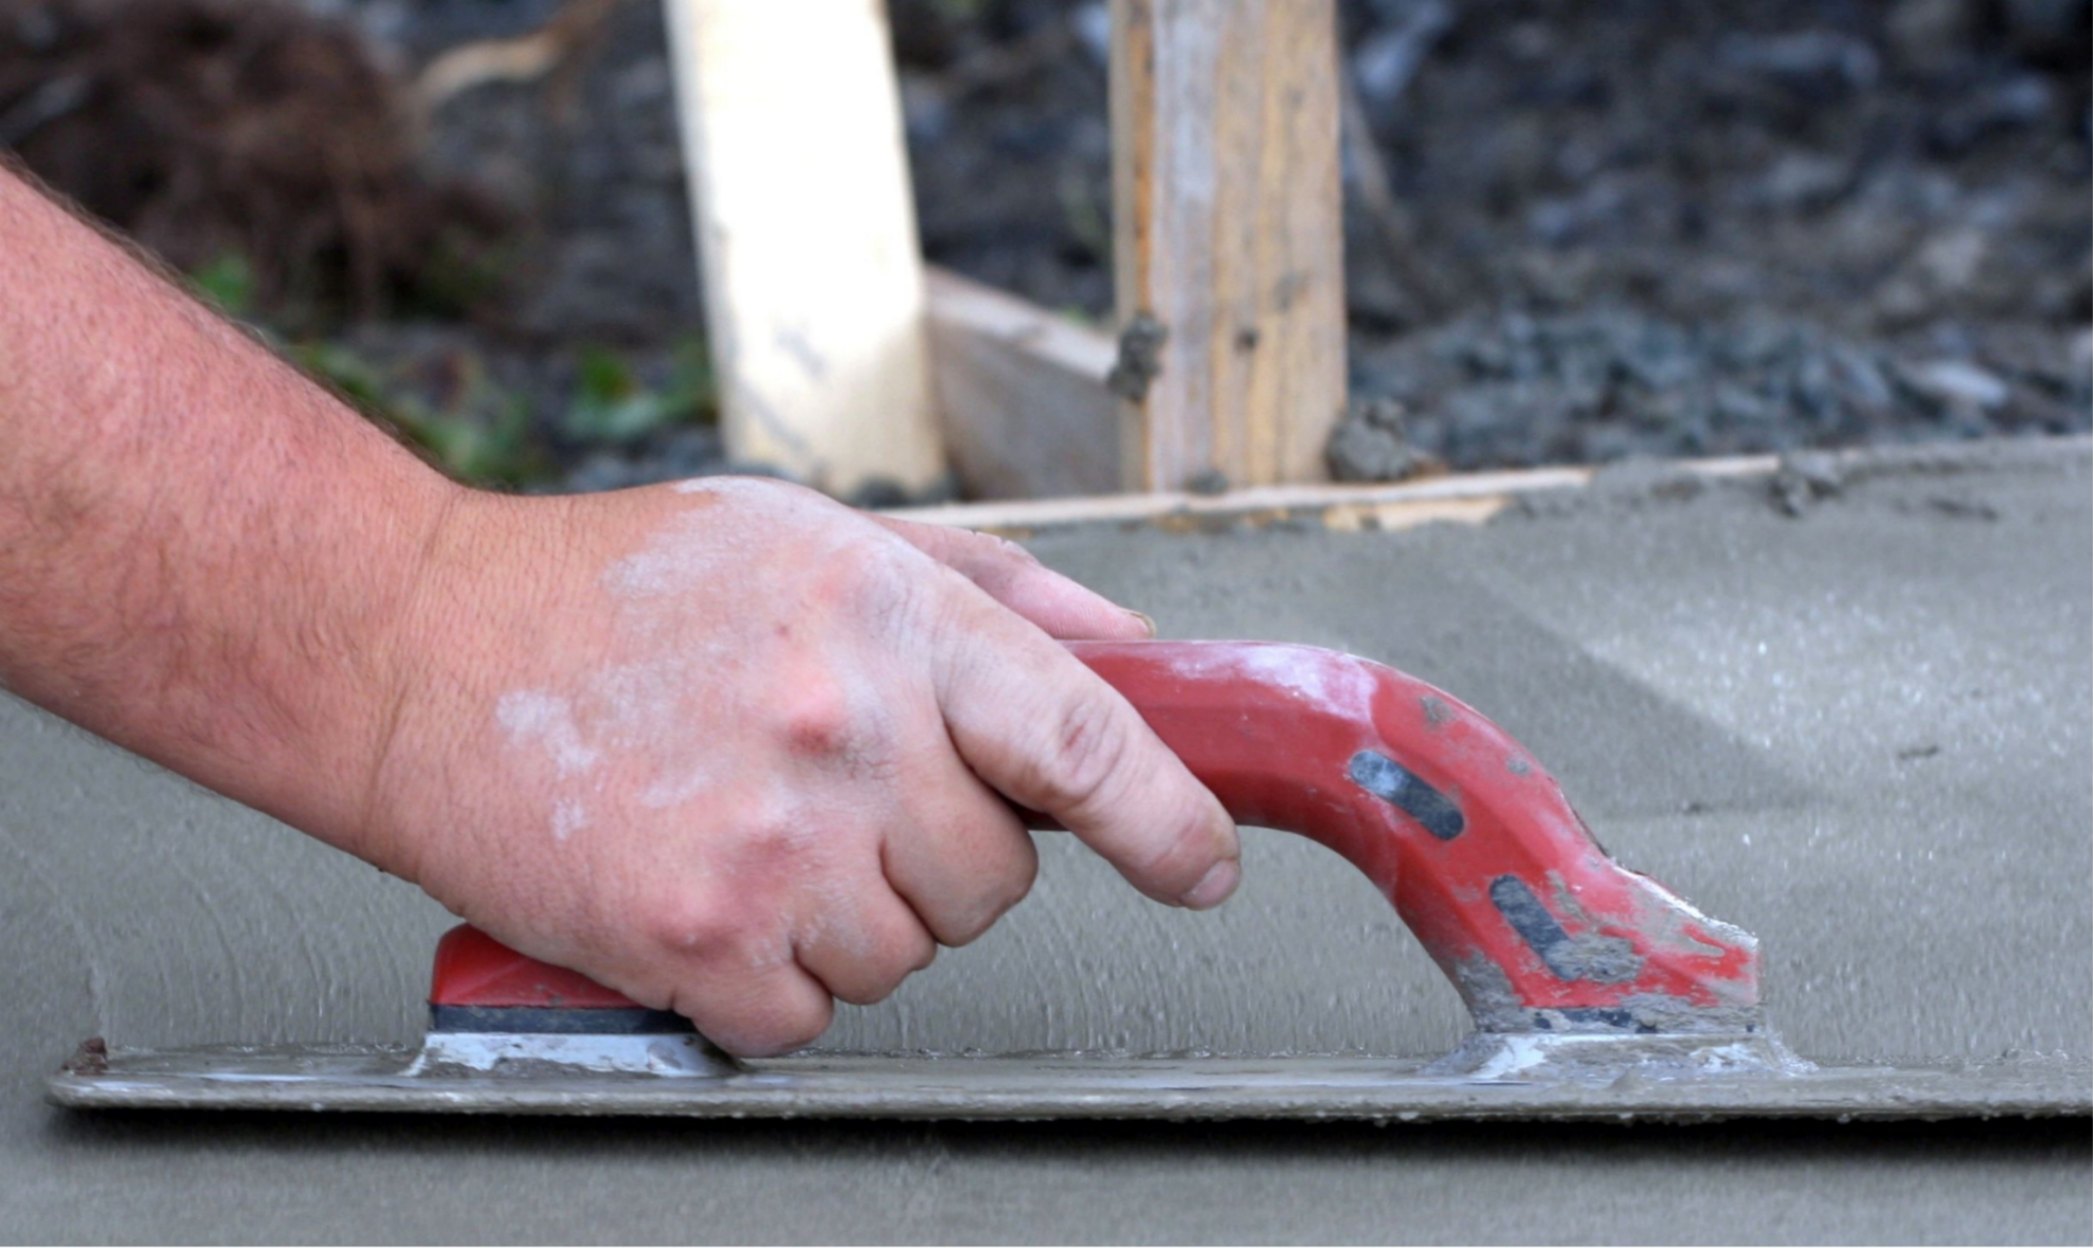 How-To Guides for Concrete Repair Projects